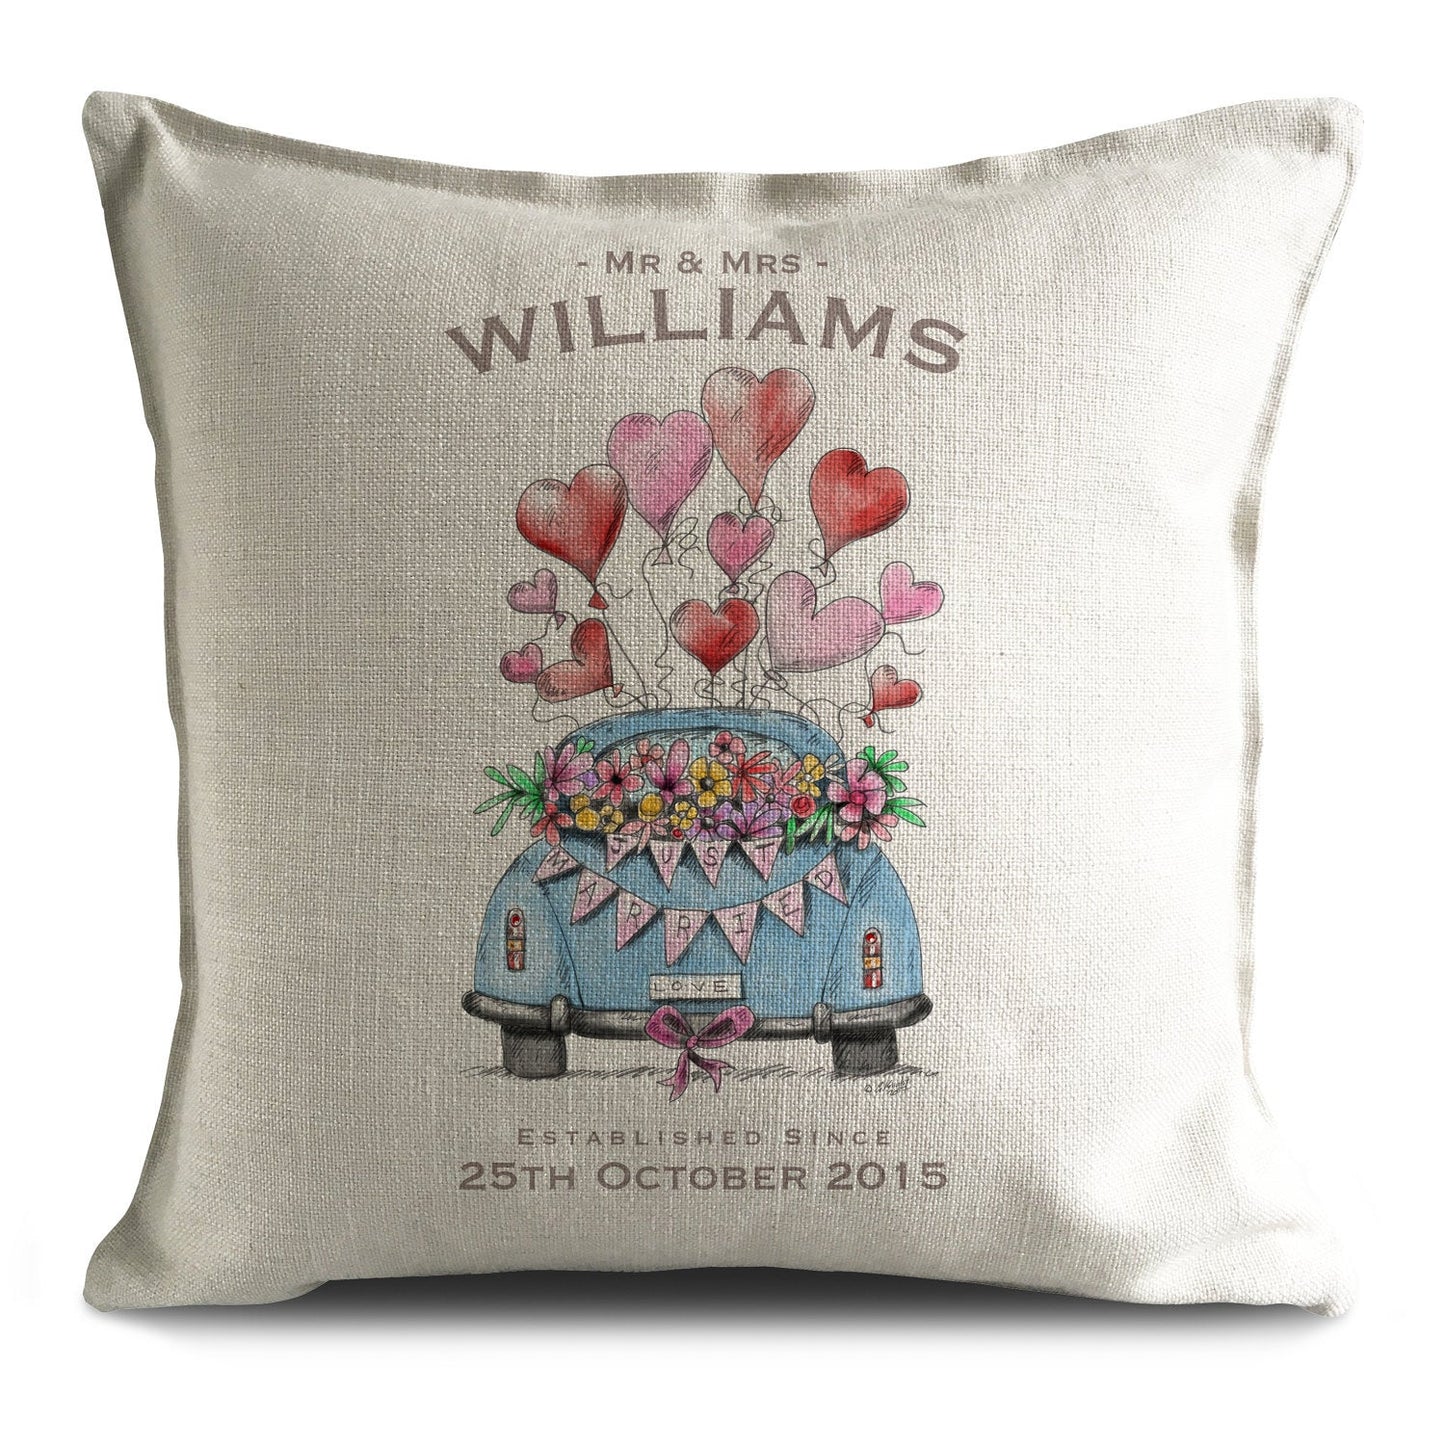 Personalised custom wedding gift cushion cover with vintage car and love hearts illustration